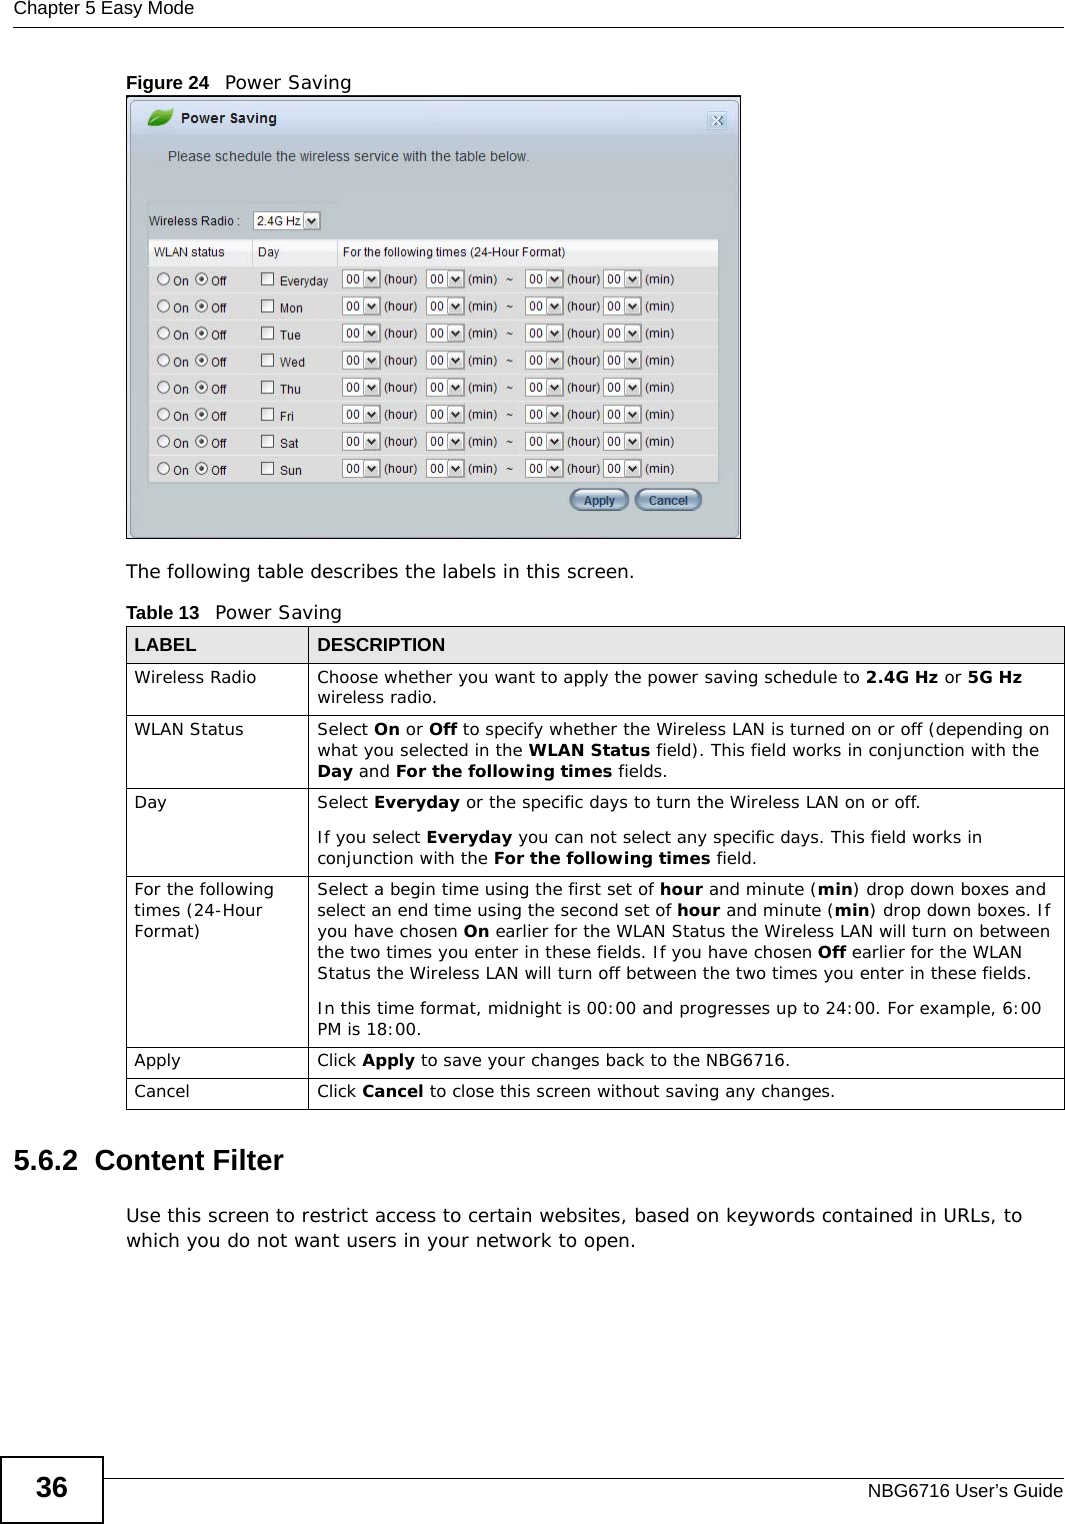 Chapter 5 Easy ModeNBG6716 User’s Guide36Figure 24   Power Saving The following table describes the labels in this screen.5.6.2  Content FilterUse this screen to restrict access to certain websites, based on keywords contained in URLs, to which you do not want users in your network to open.Table 13   Power Saving LABEL DESCRIPTIONWireless Radio Choose whether you want to apply the power saving schedule to 2.4G Hz or 5G Hz wireless radio.WLAN Status Select On or Off to specify whether the Wireless LAN is turned on or off (depending on what you selected in the WLAN Status field). This field works in conjunction with the Day and For the following times fields.Day Select Everyday or the specific days to turn the Wireless LAN on or off. If you select Everyday you can not select any specific days. This field works in conjunction with the For the following times field.For the following times (24-Hour Format)Select a begin time using the first set of hour and minute (min) drop down boxes and select an end time using the second set of hour and minute (min) drop down boxes. If you have chosen On earlier for the WLAN Status the Wireless LAN will turn on between the two times you enter in these fields. If you have chosen Off earlier for the WLAN Status the Wireless LAN will turn off between the two times you enter in these fields. In this time format, midnight is 00:00 and progresses up to 24:00. For example, 6:00 PM is 18:00.Apply Click Apply to save your changes back to the NBG6716.Cancel Click Cancel to close this screen without saving any changes.